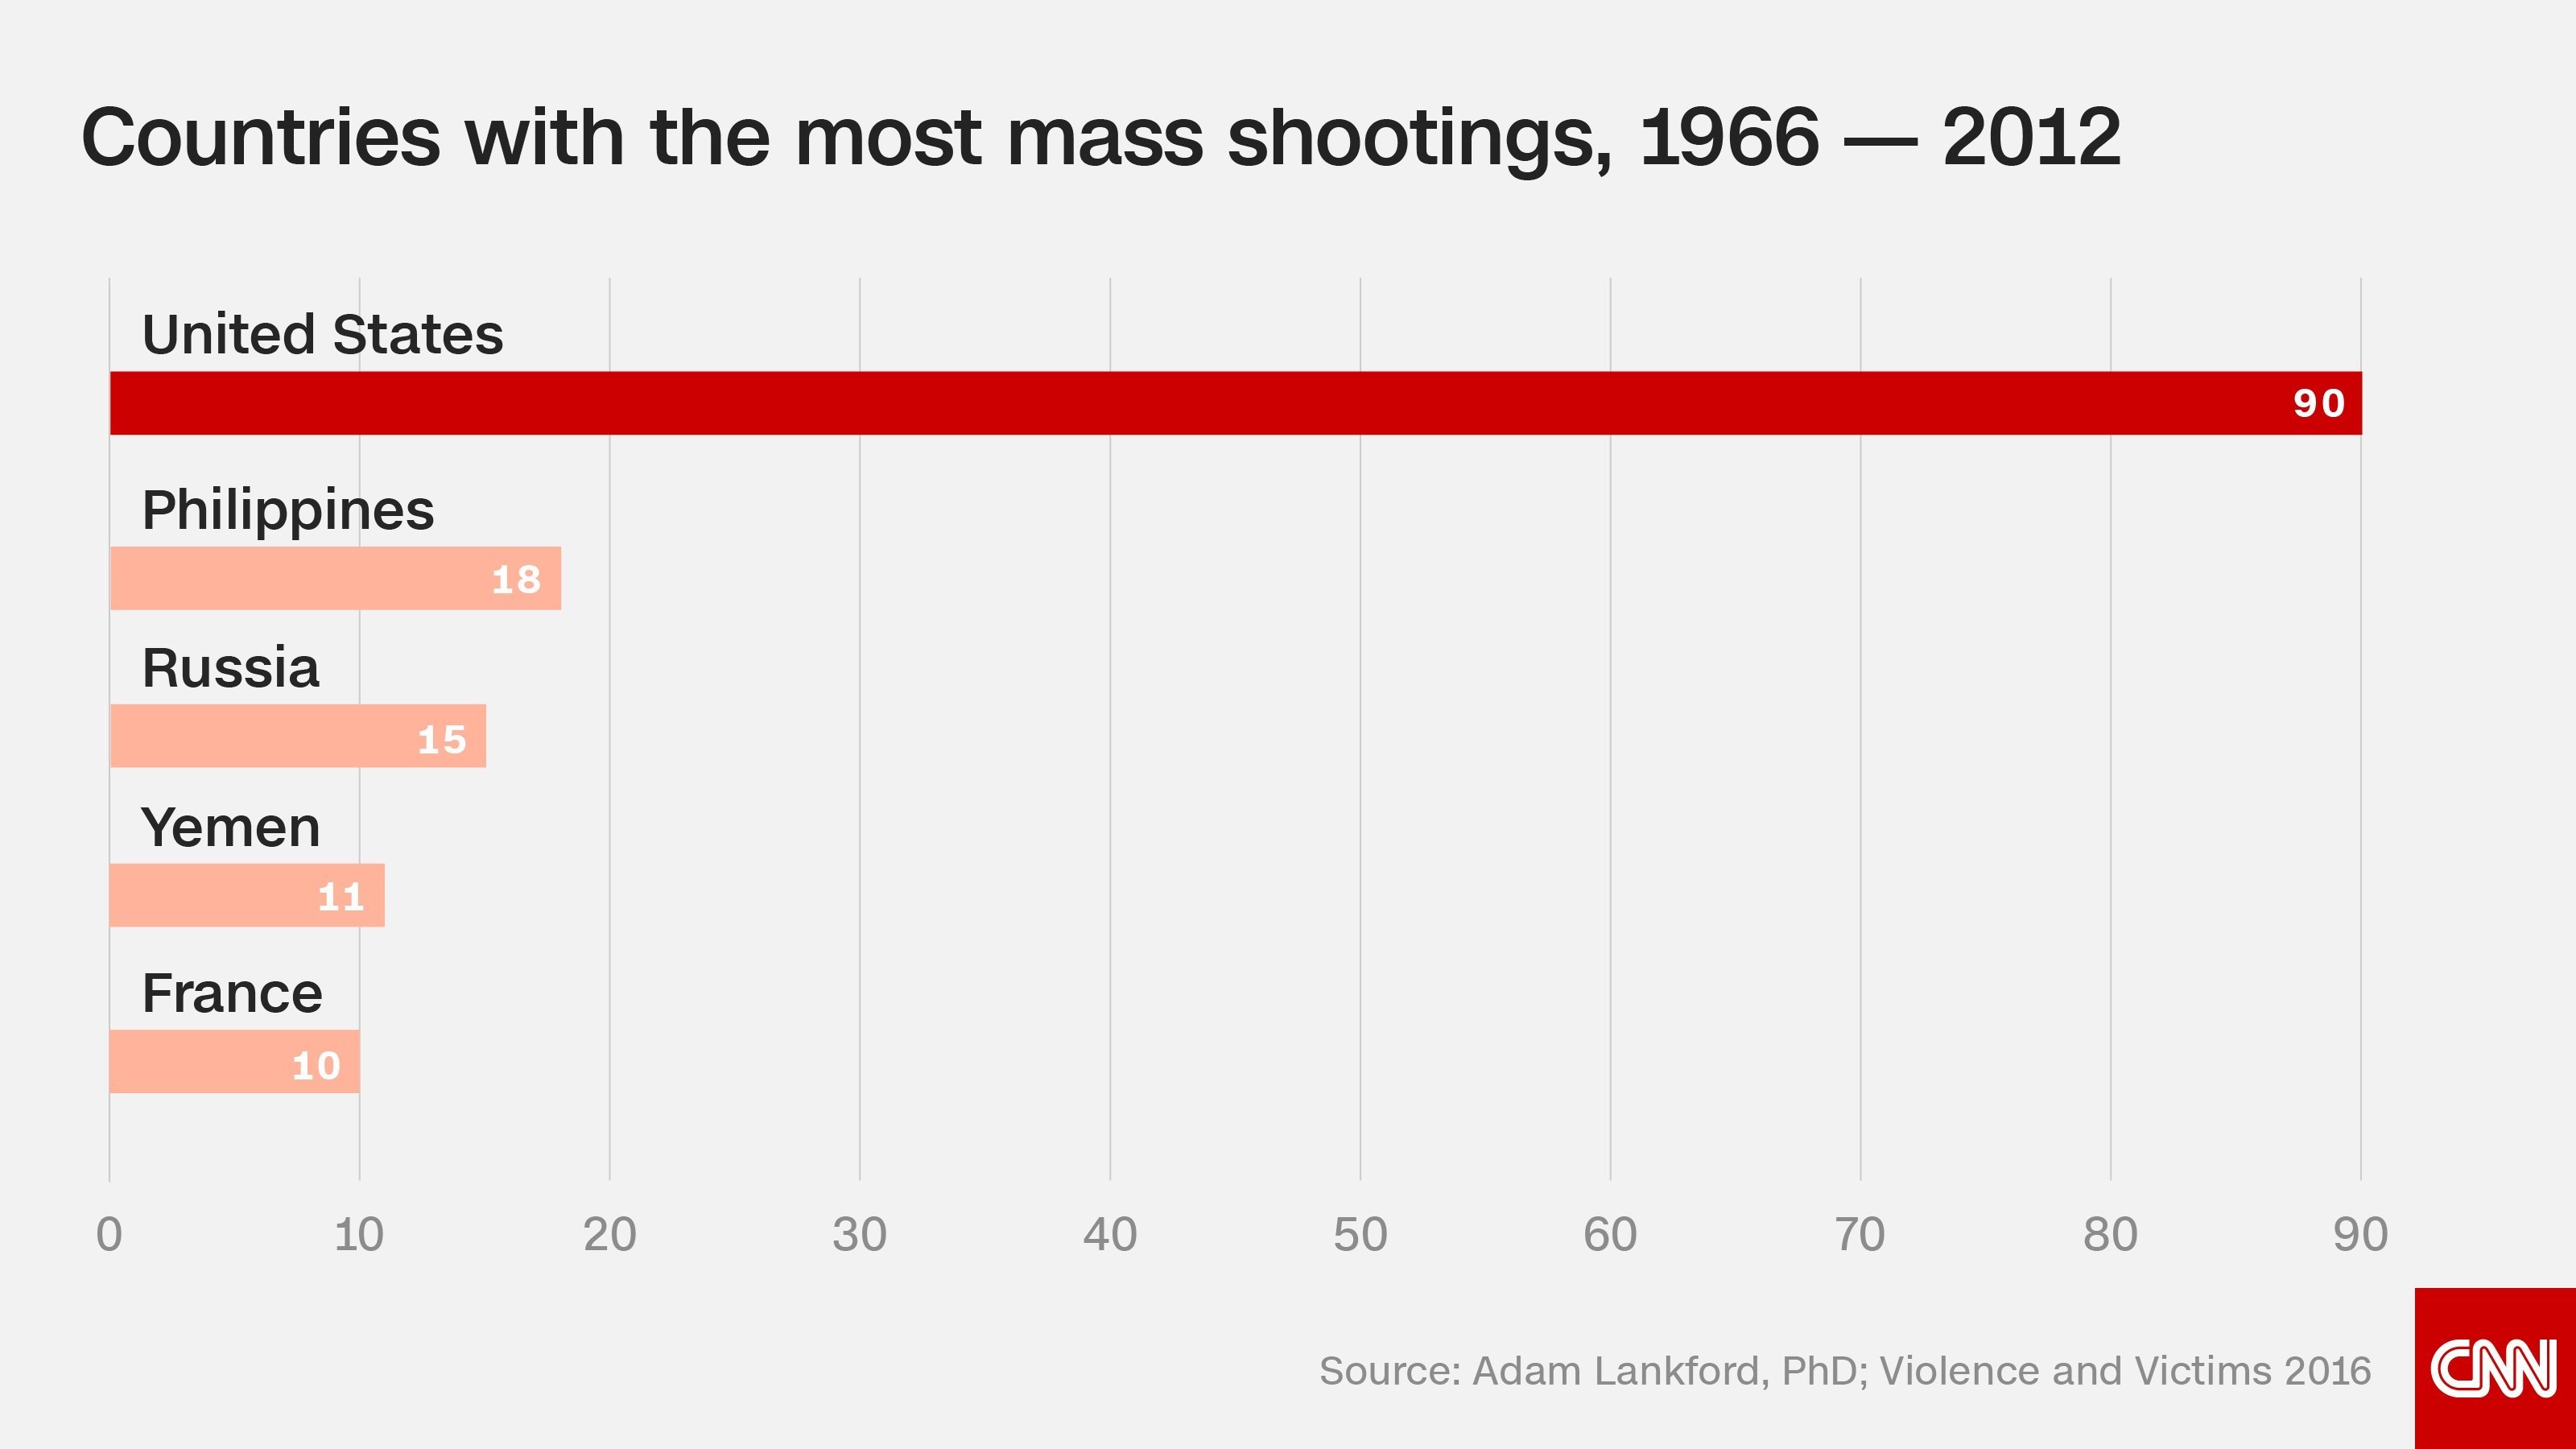 There are more mass shootings in the U.S. than in any other country in the world.